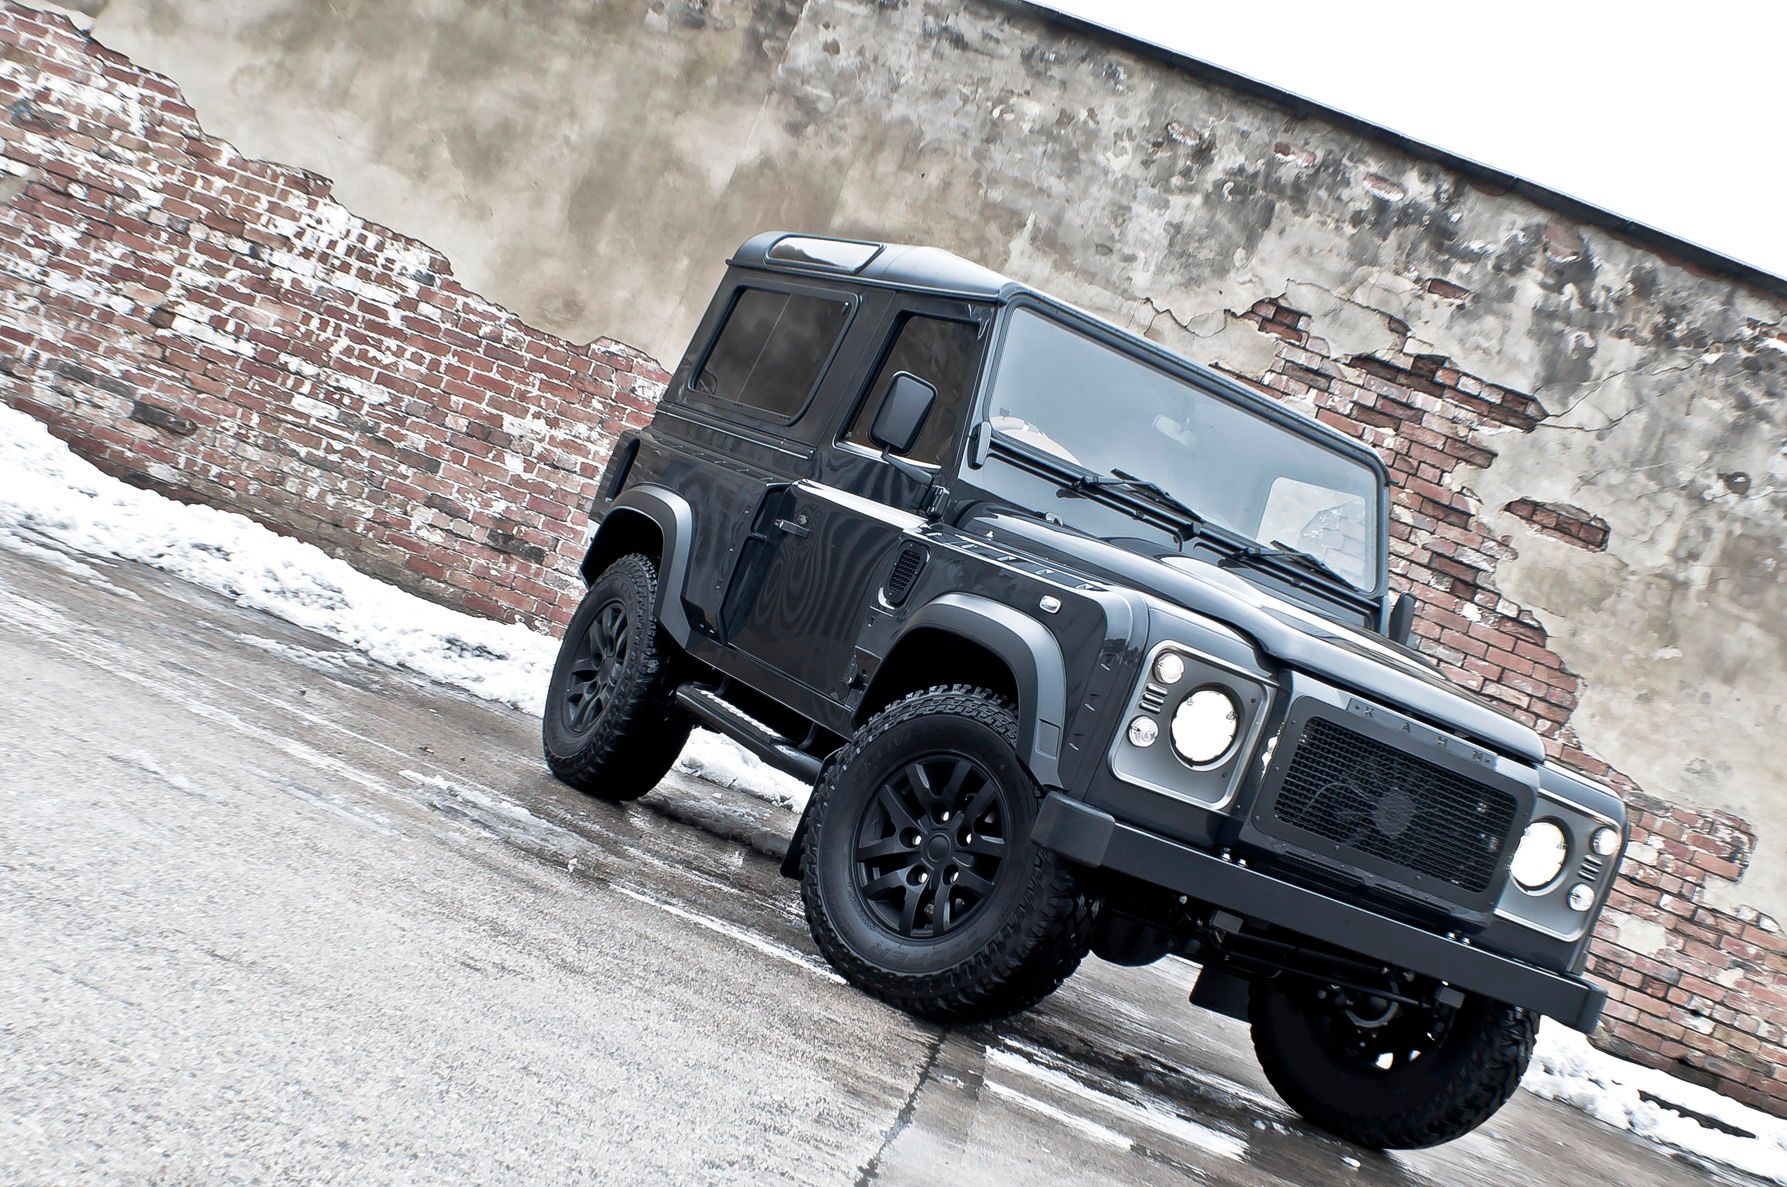 2013 Land Rover Defender Military Edition by Kahn Design